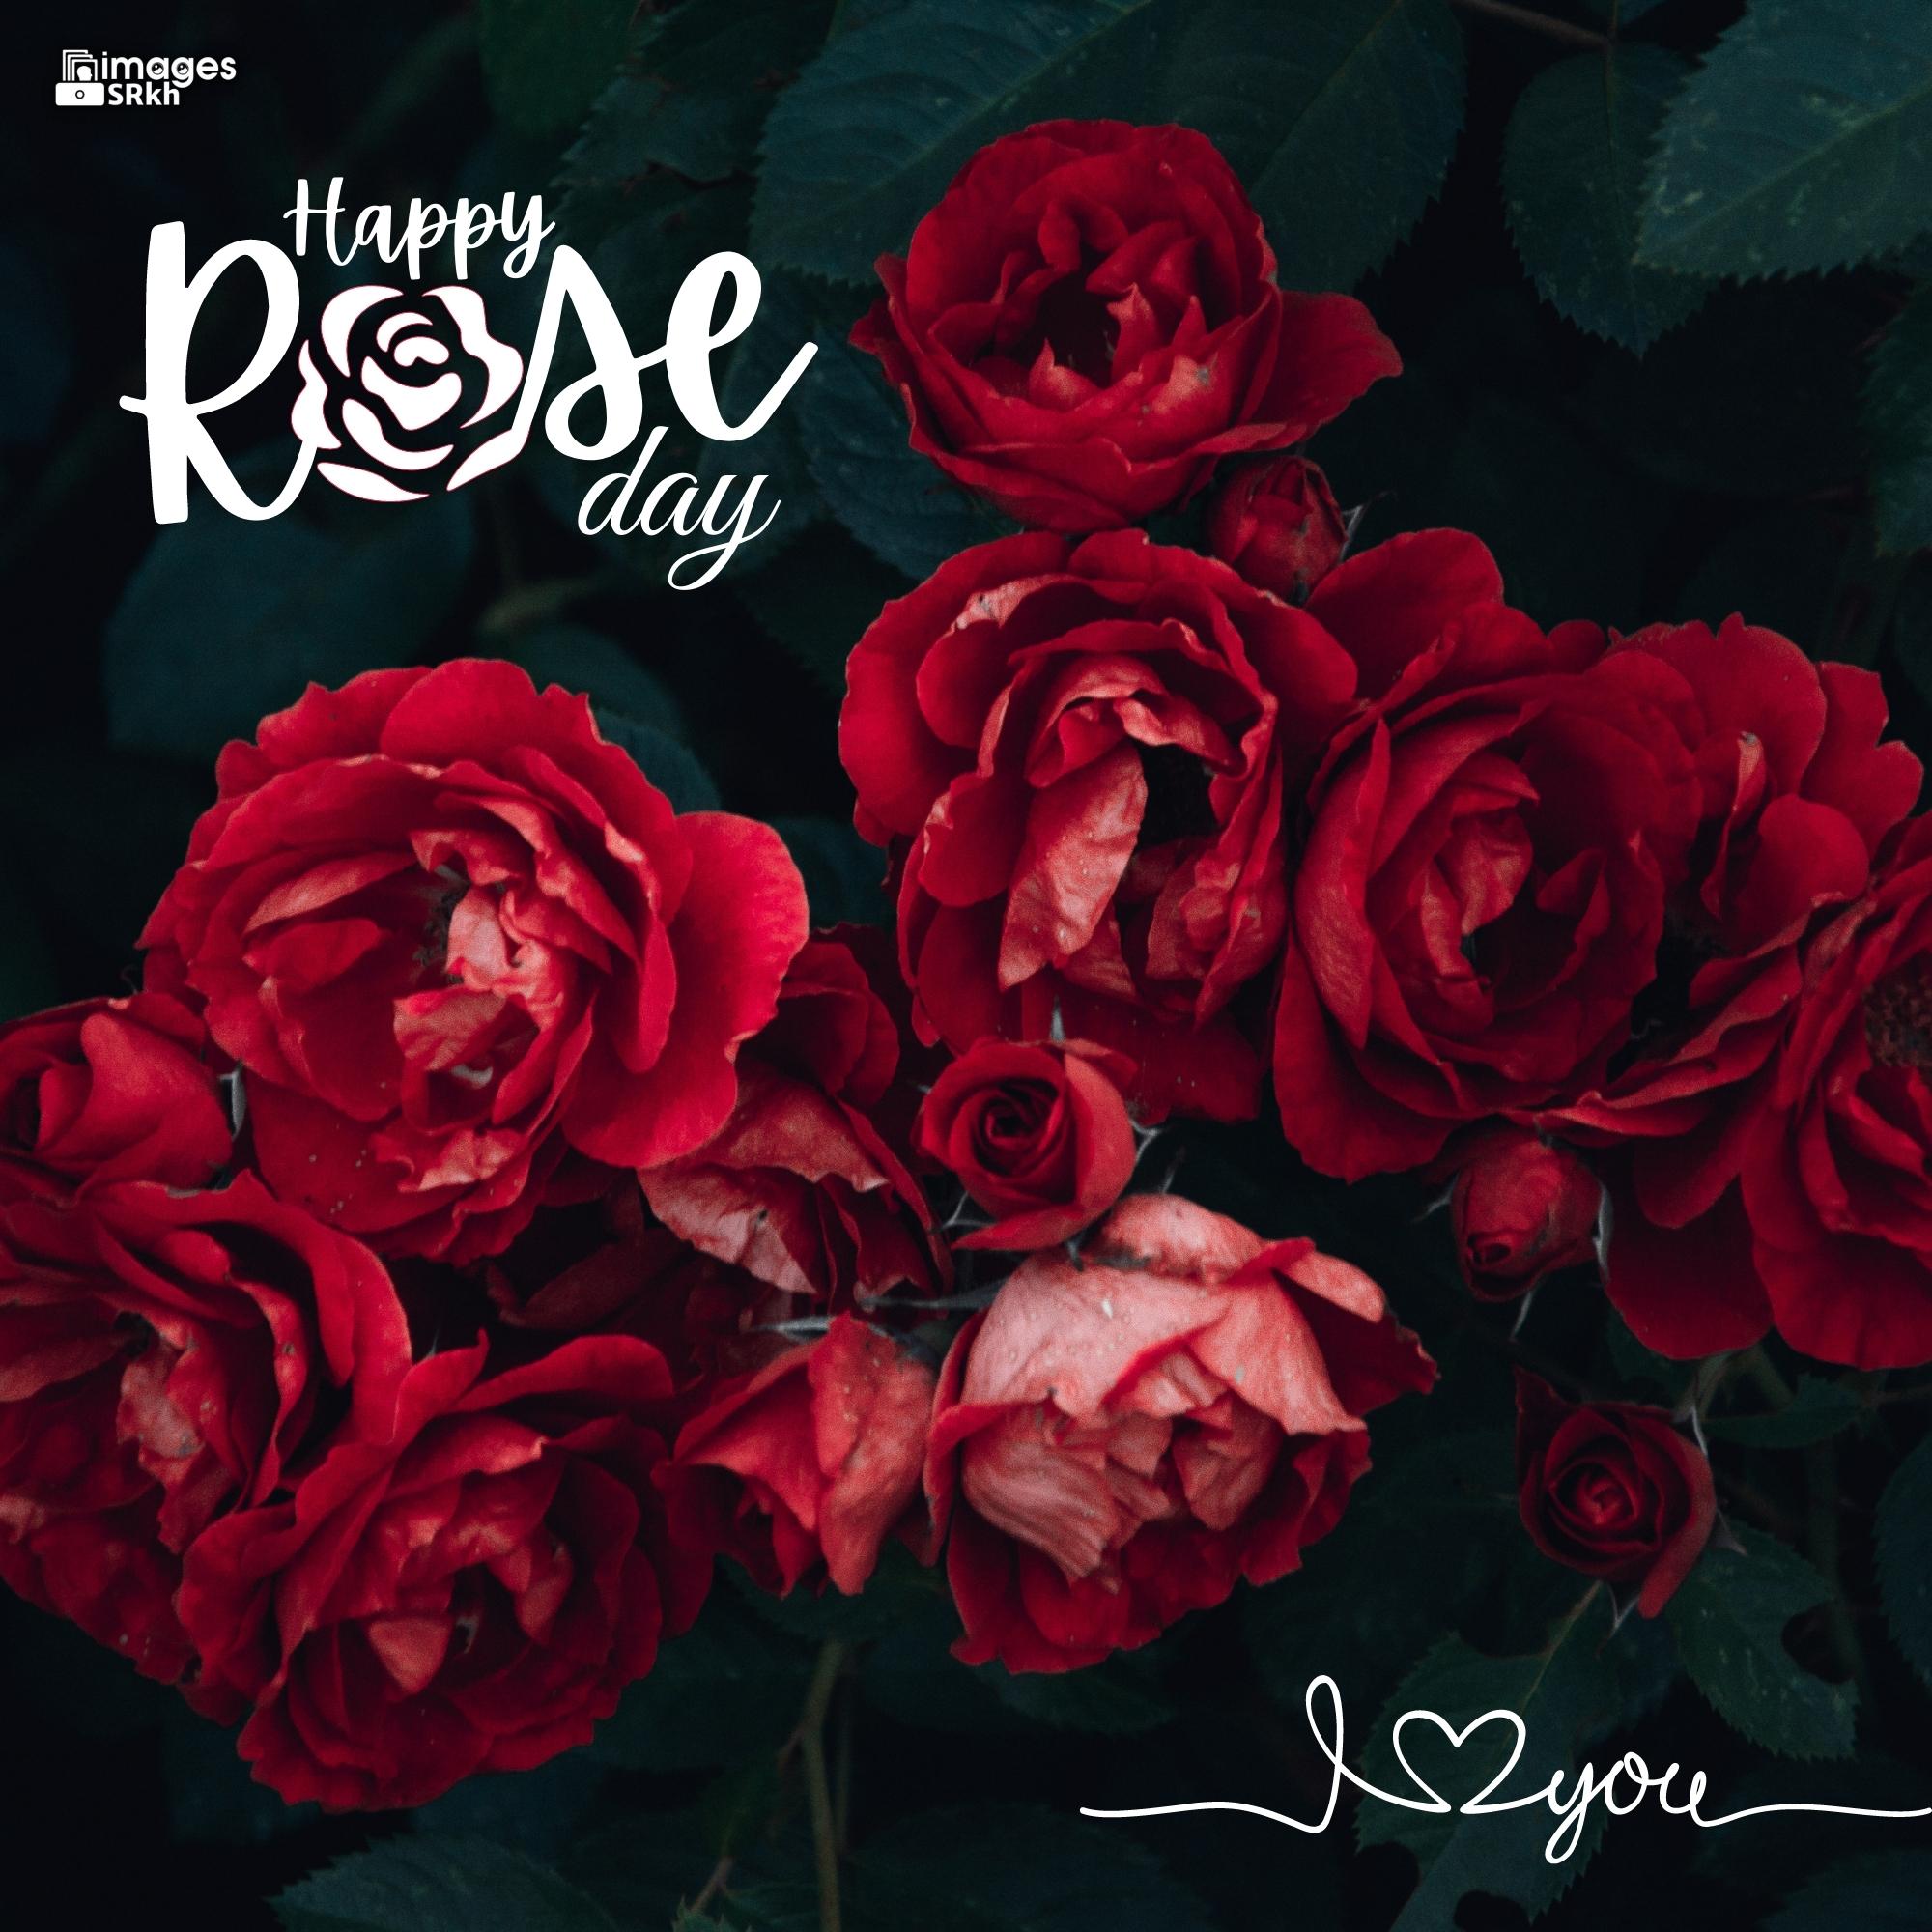 Happy Rose Day Image Hd Download (43)